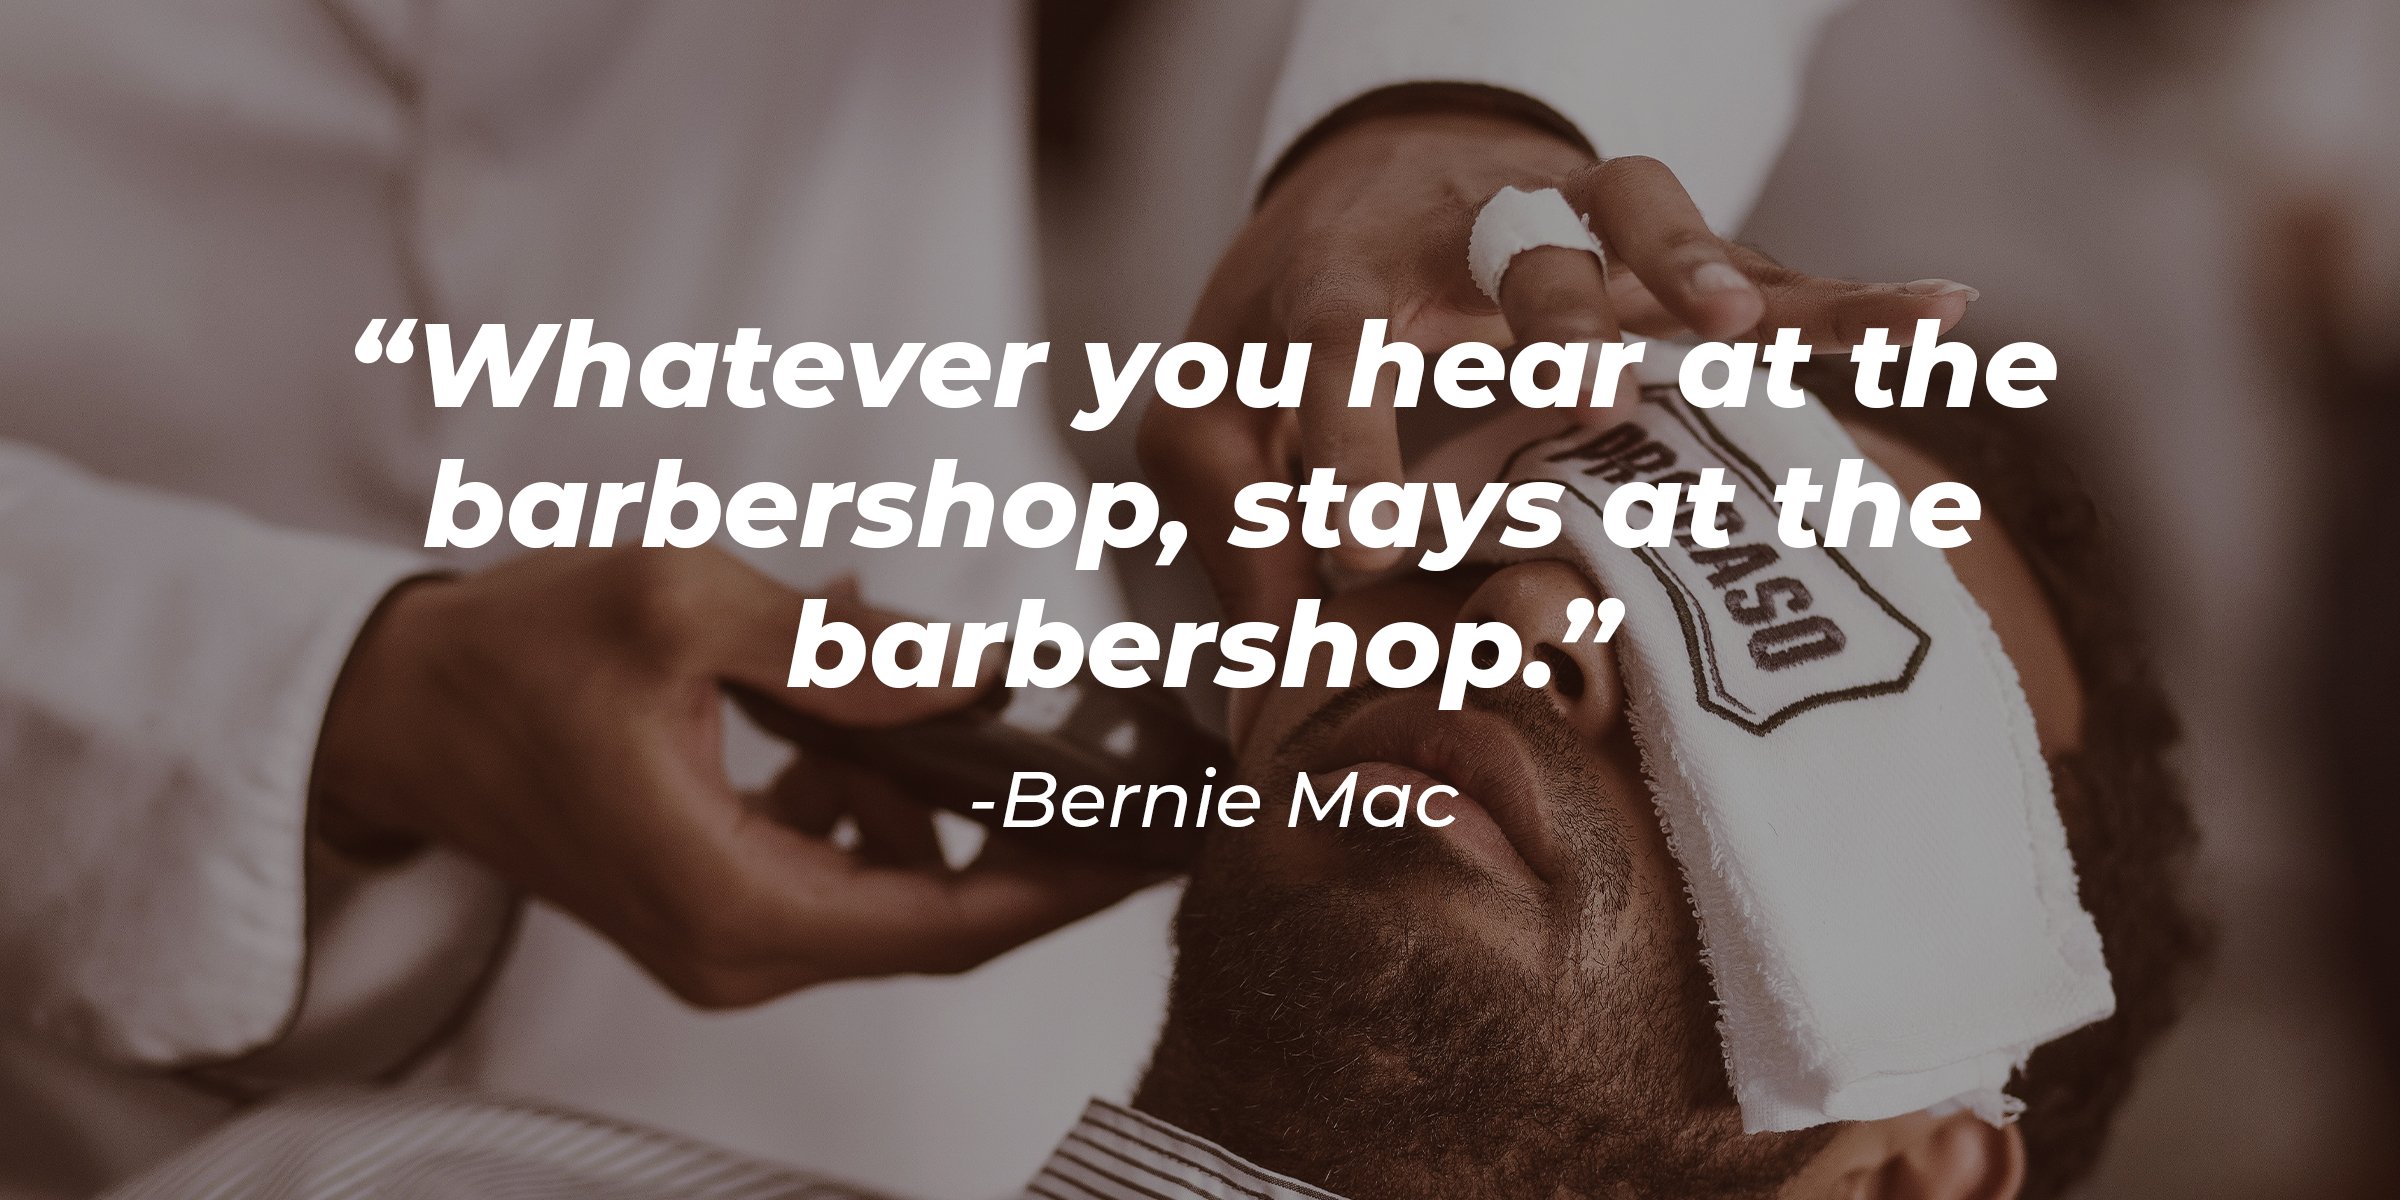 Unsplash | A man inside a barber shop with a quote, "Whatever you hear at the barbershop, stays at the barbershop," by Bernie Mac.